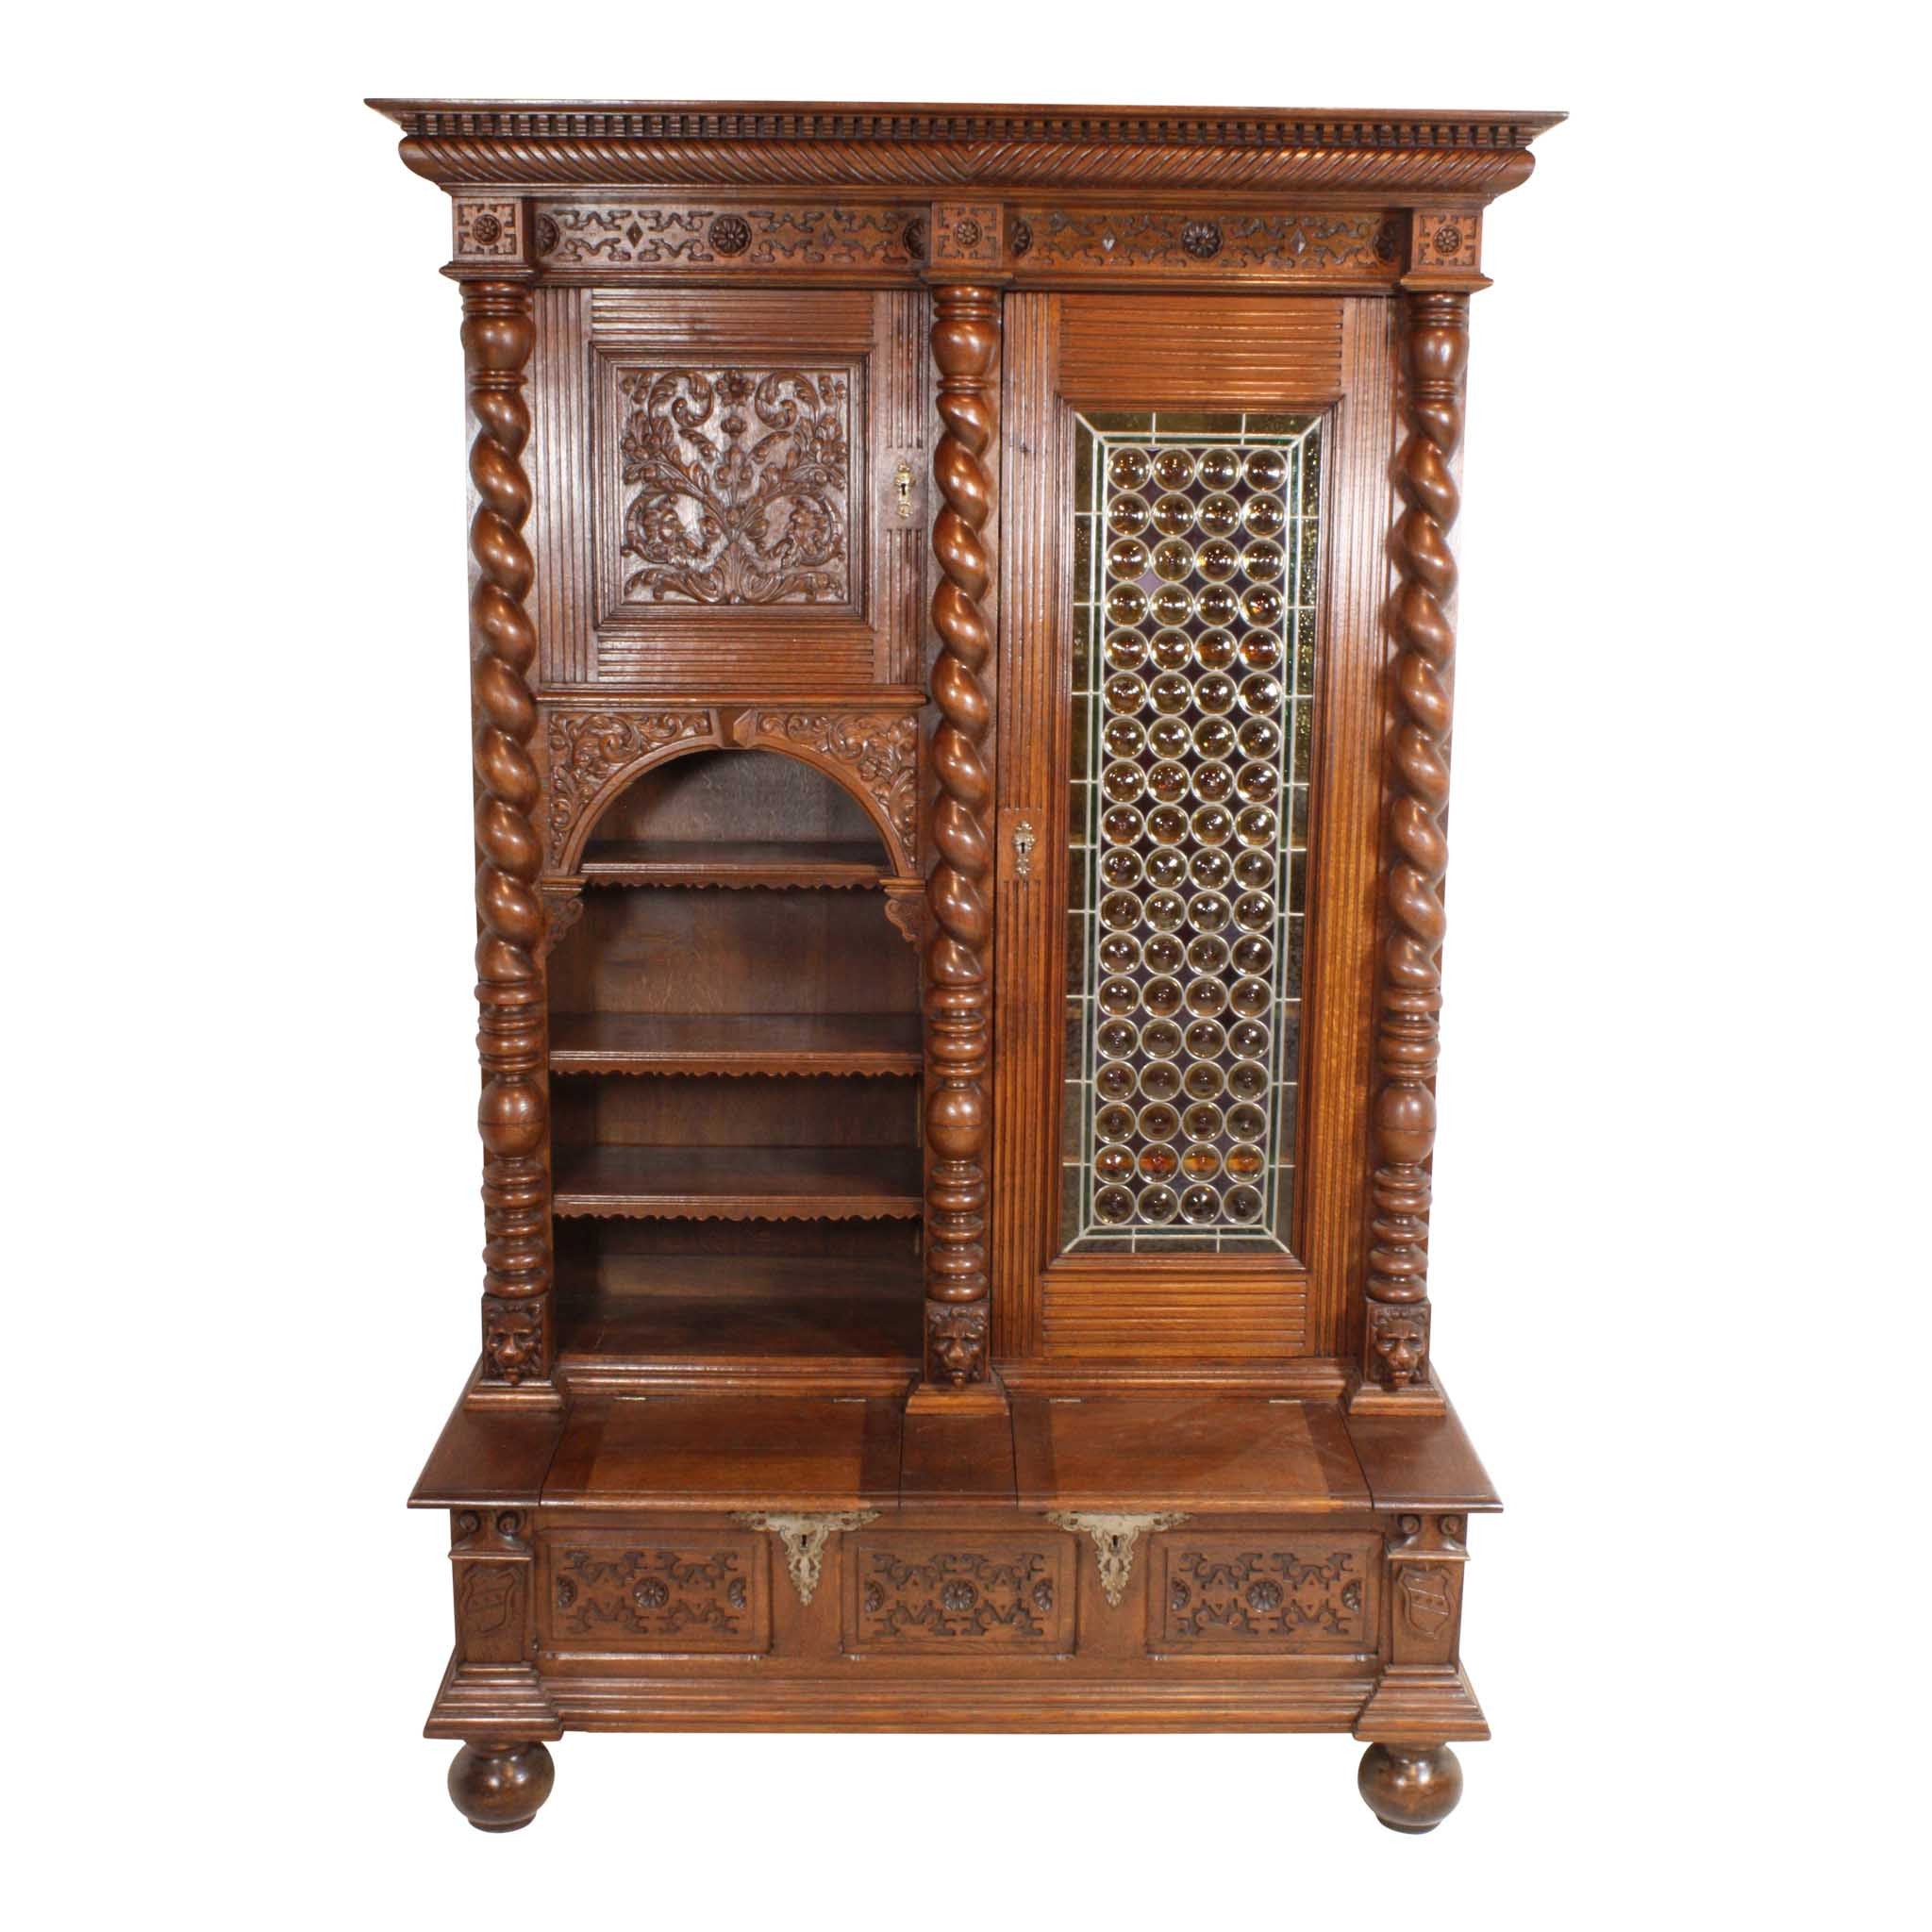 ski-country-antiques - Renaissance Style Book Case with Leaded Glass Door